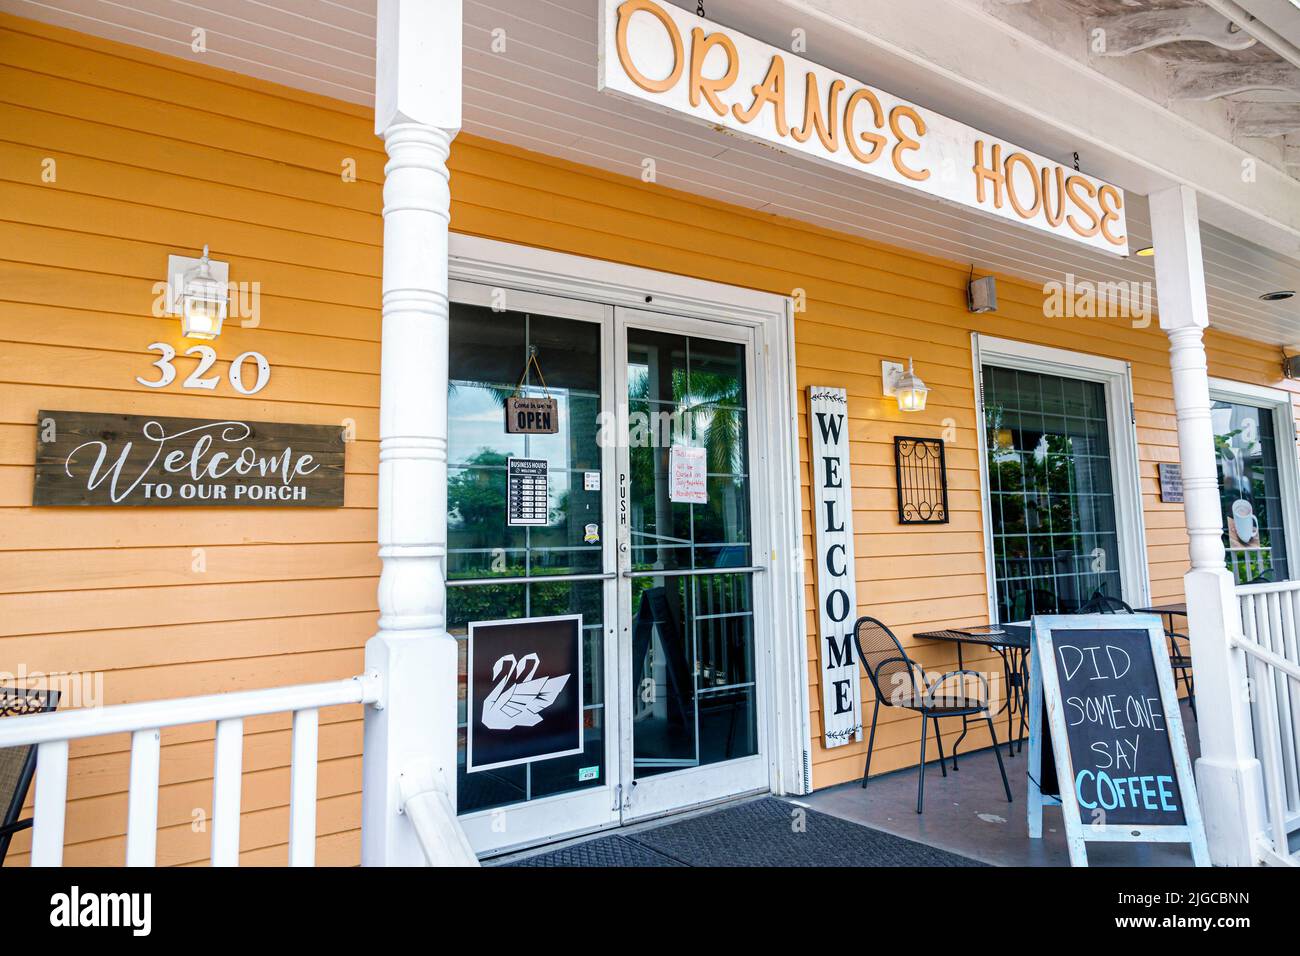 Punta Gorda Florida,Historic District Los Dos Cristianos Coffee Shop Orange House porch,repurposed house home converted to business outside exterior Stock Photo